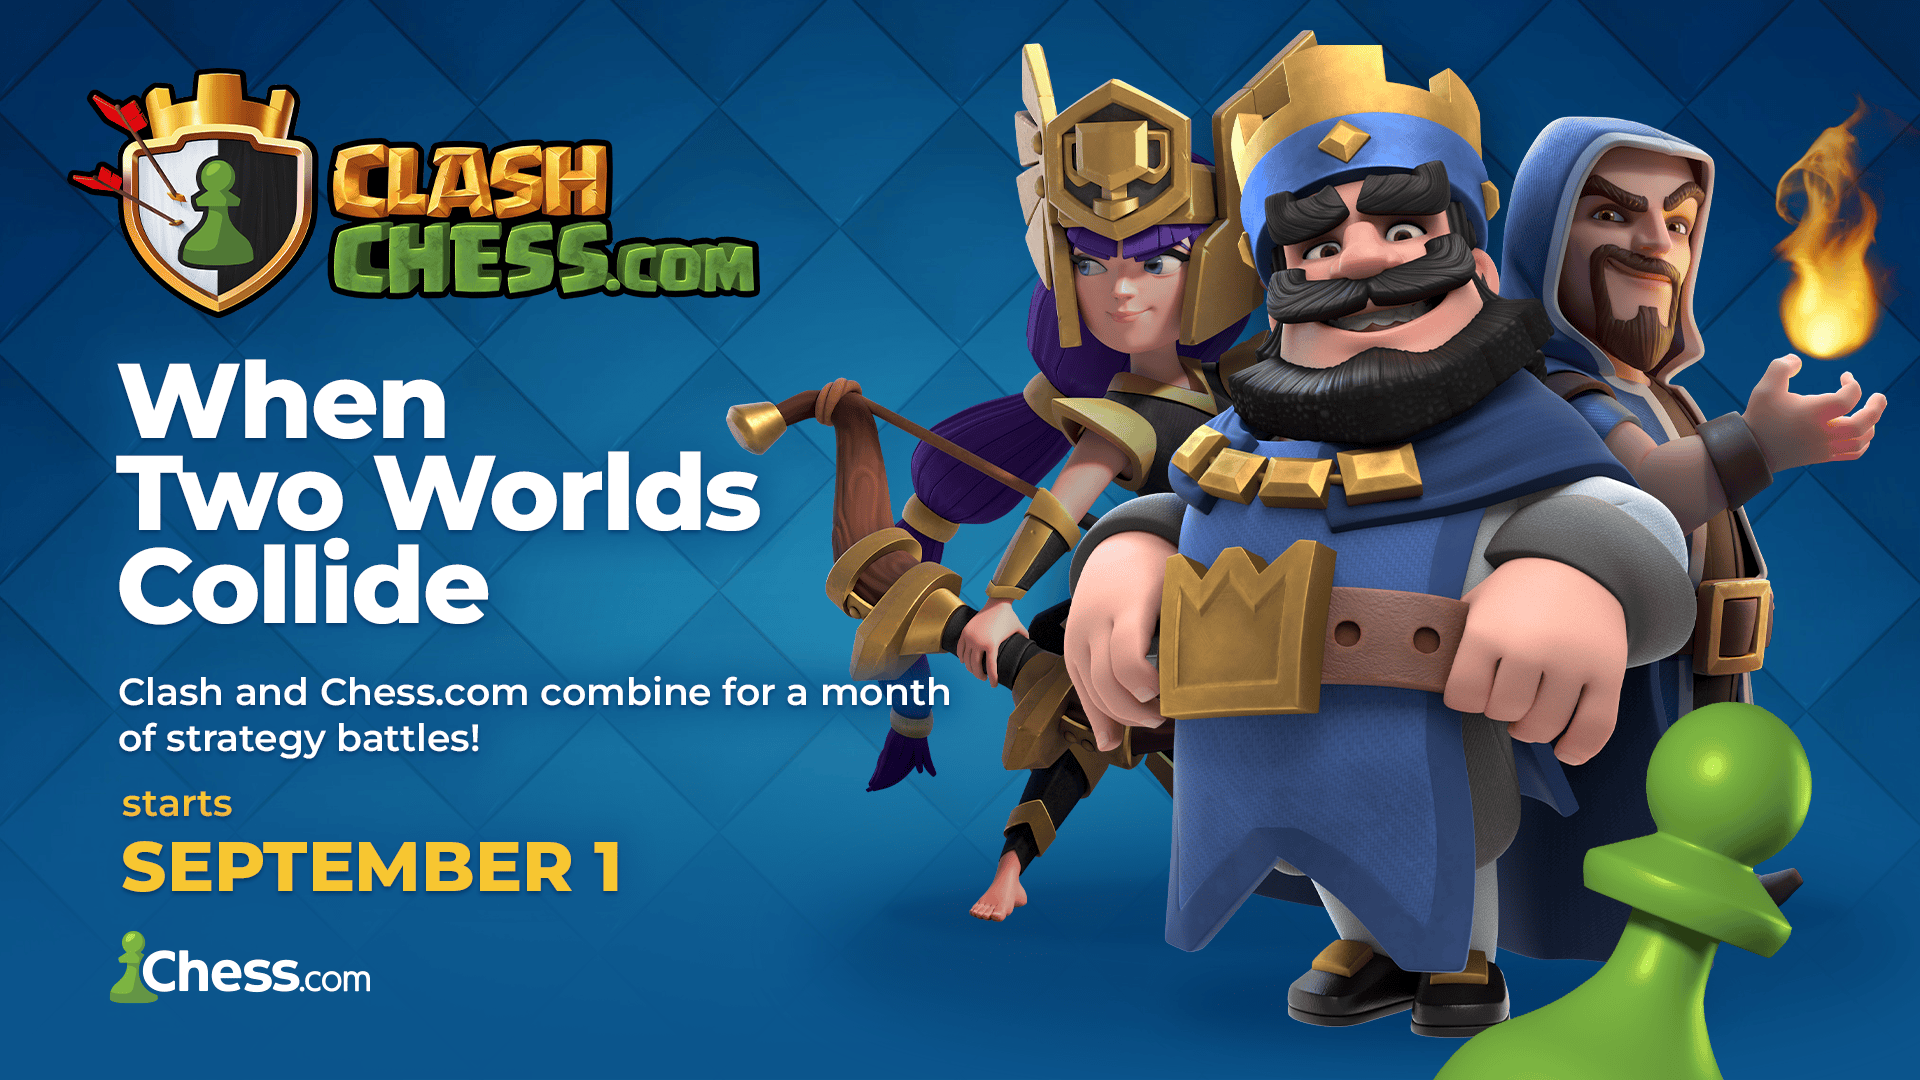 Clash Royale: King's Gambit Season is Here!, Welcome to…♜♞♝♛♚♝♞♜! This  Season, Chess.com is raiding Clash Royale! * NEW GAME MODE: Chess Style 😎  * CHESS COSMETICS 🎨 * NEW EVO 🔥, By Clash Royale